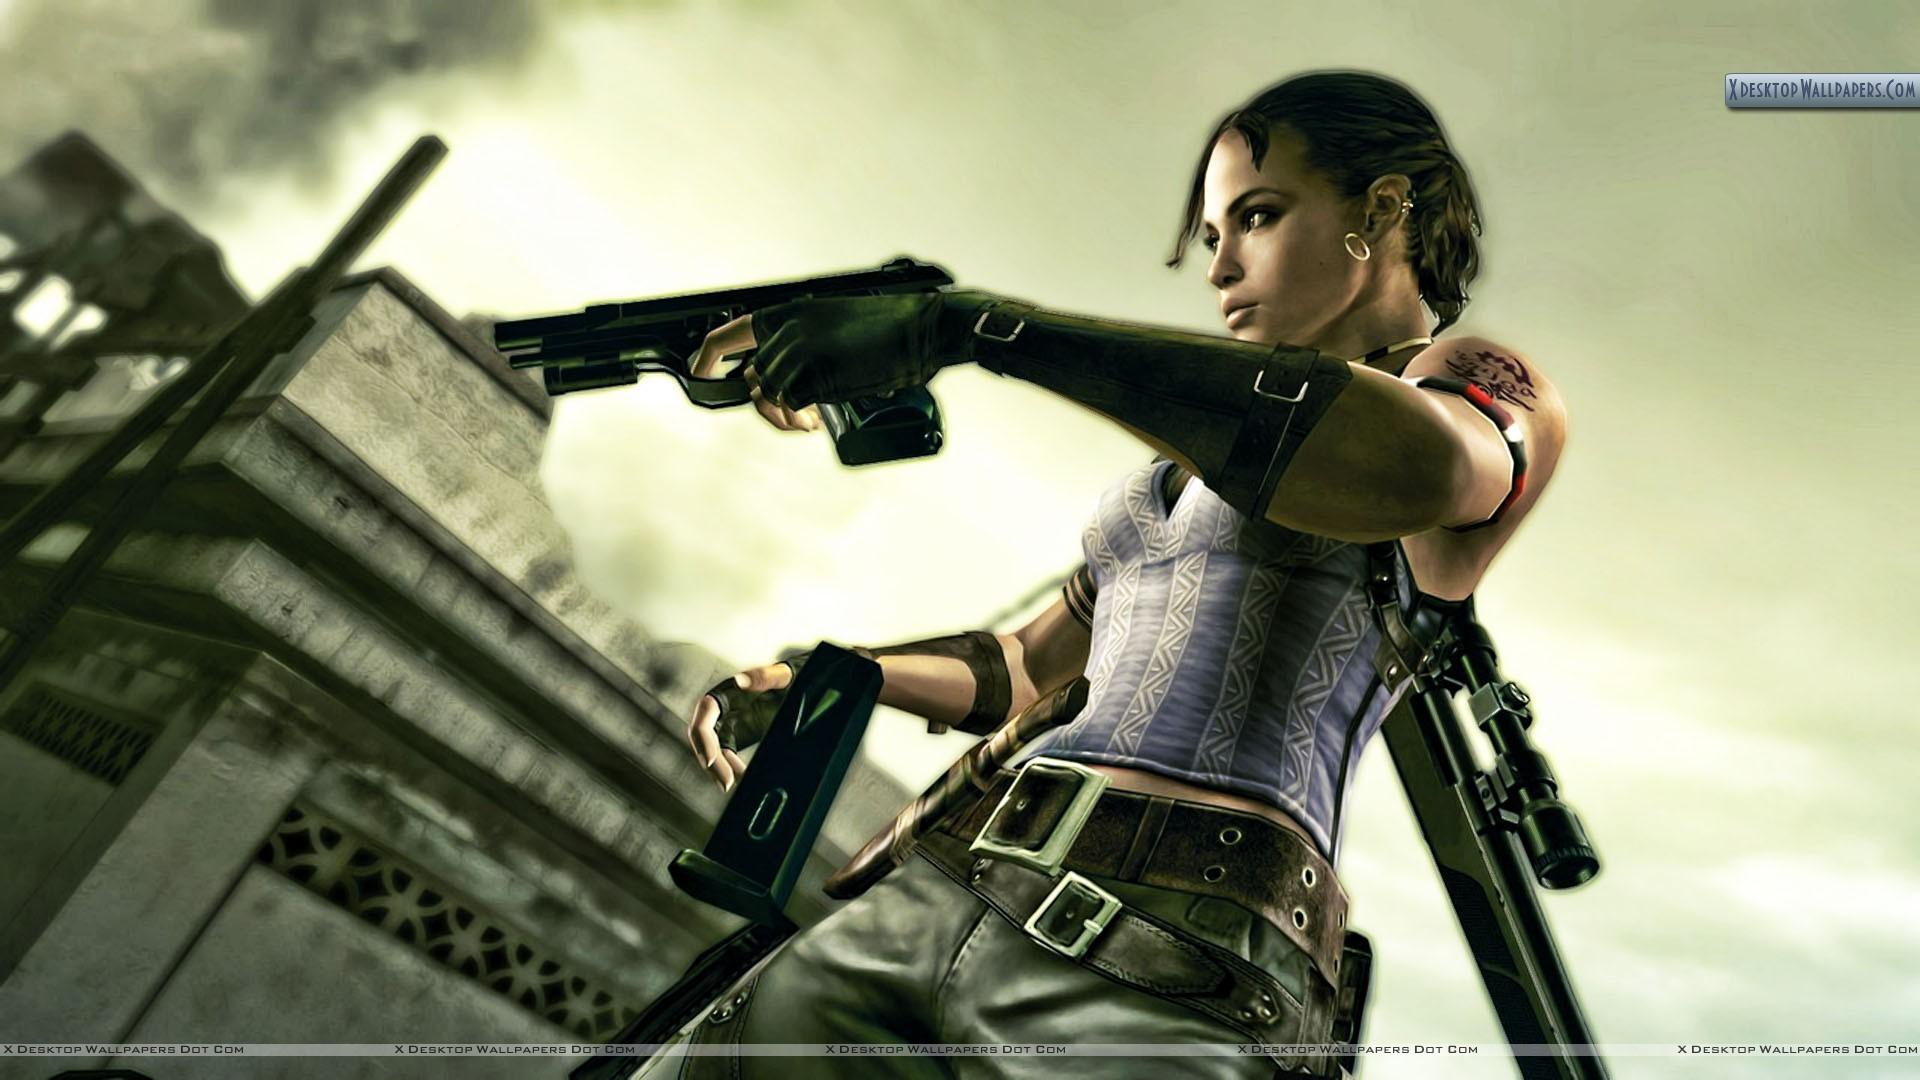 Resident Evil 5 Wallpaper, Photo & Image in HD